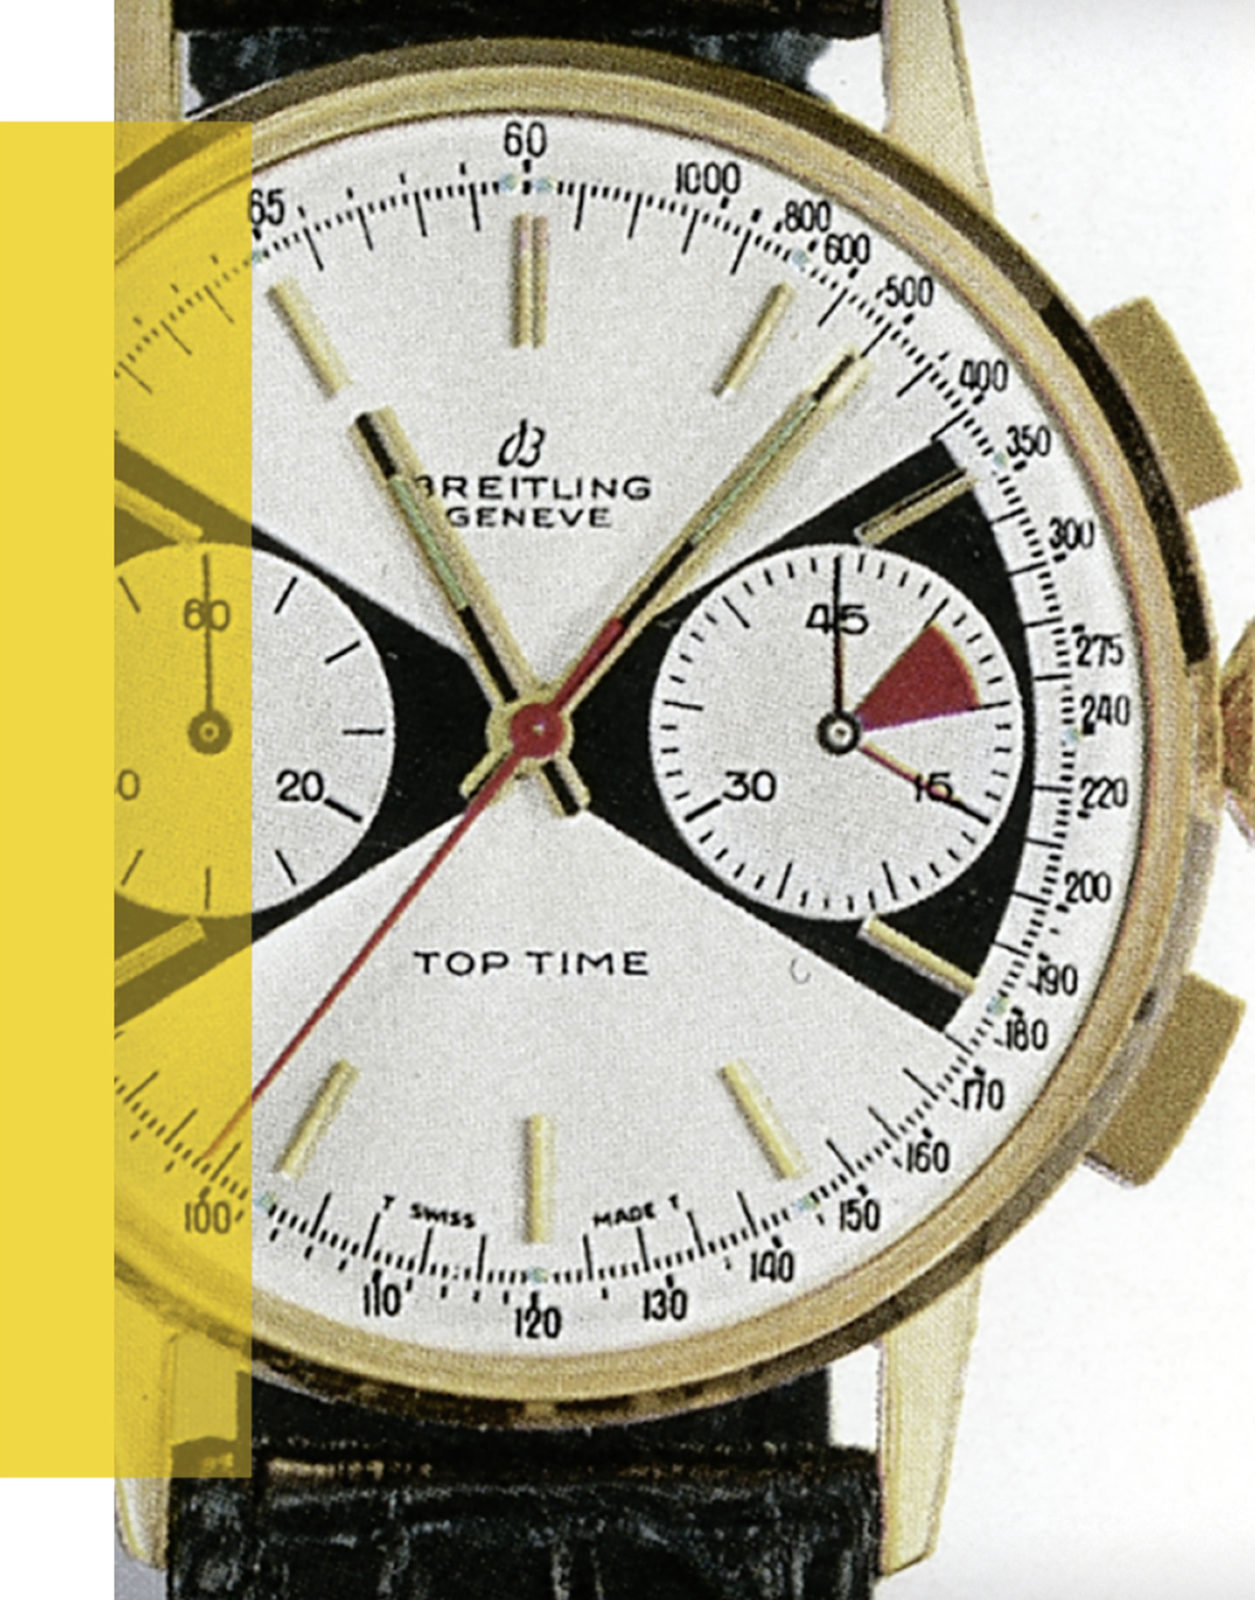 Breitling Top Time 1960s